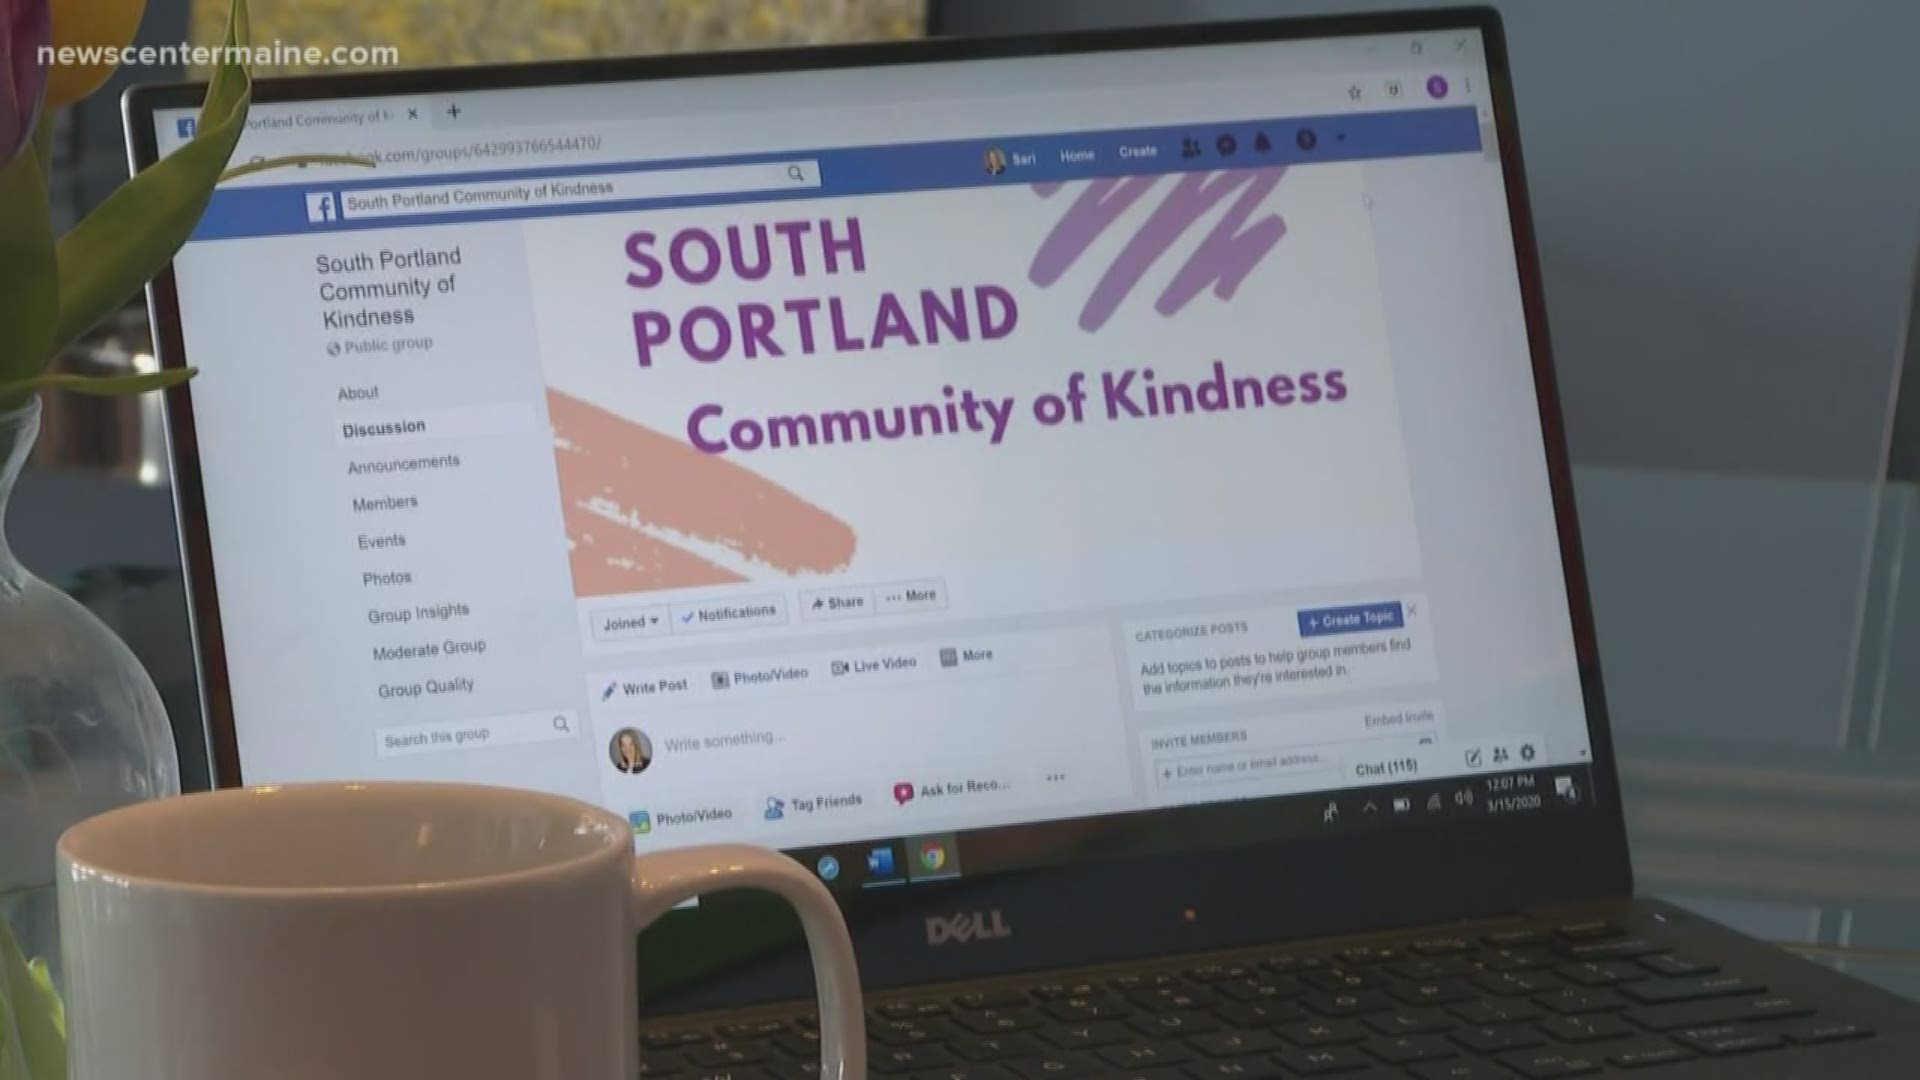 Many people are creating Facebook groups as a way to connect with people who may need assistance or childcare help during this Covid-19 pandemic.